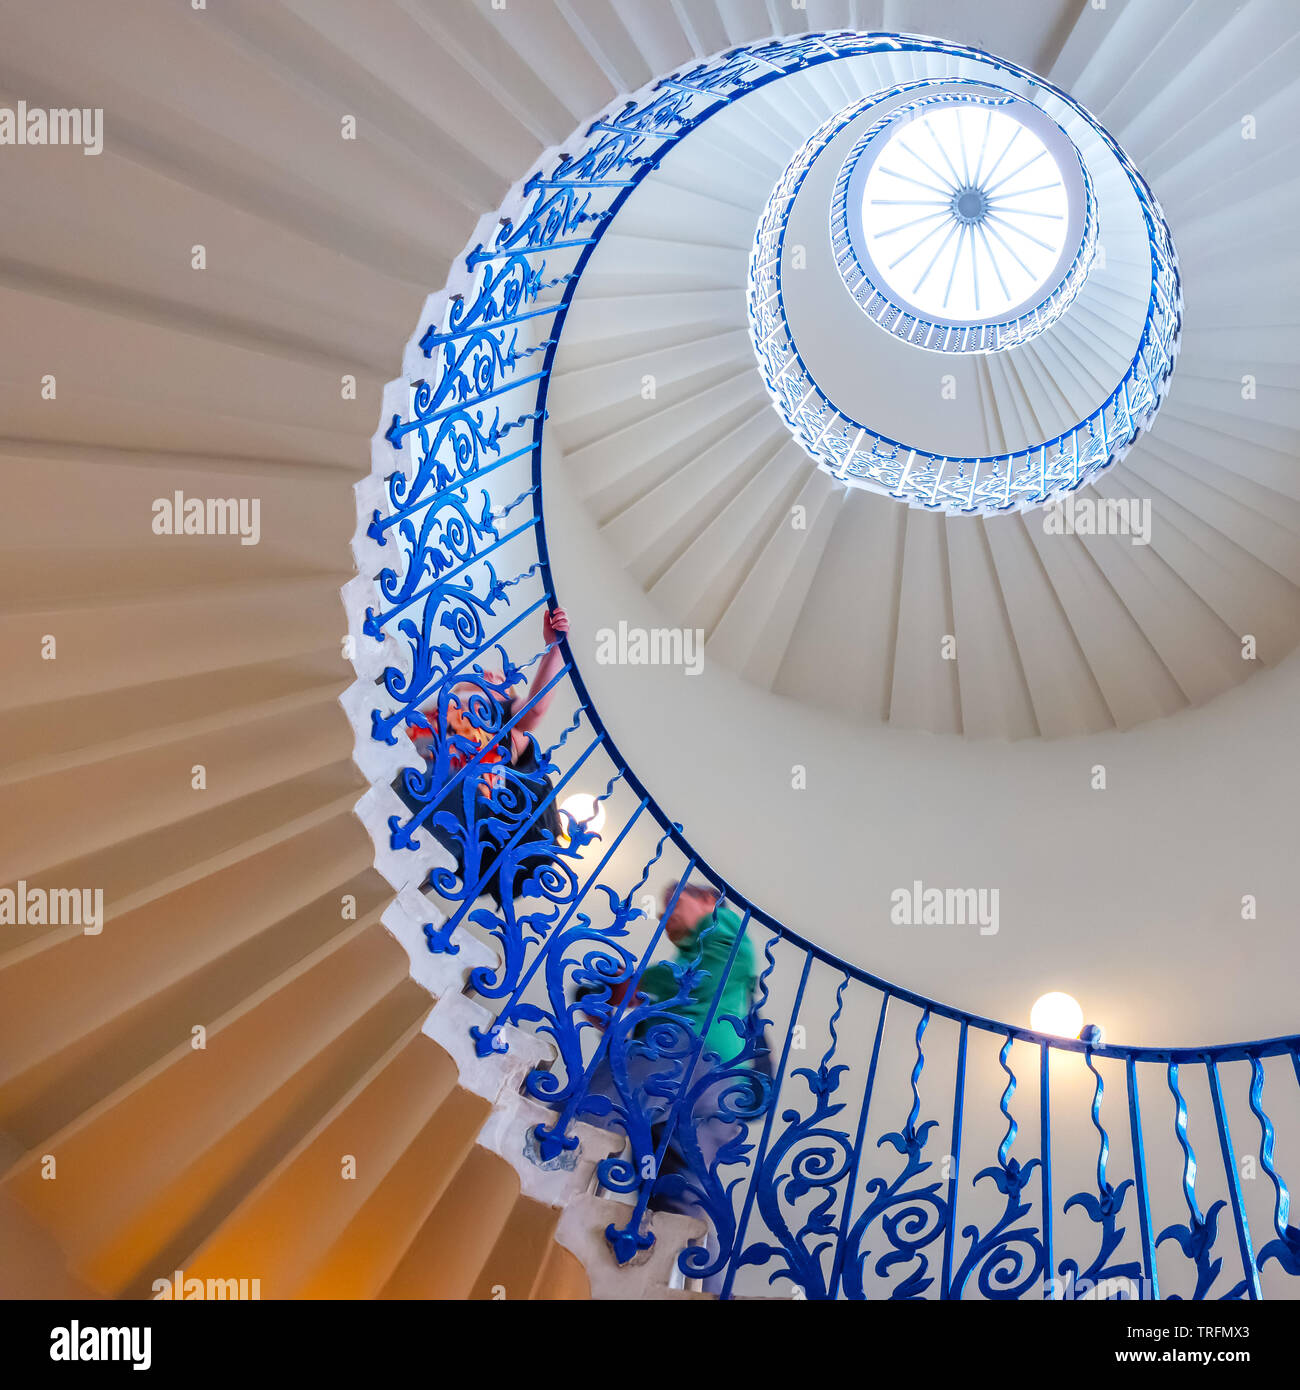 London, UK - May 21 2018: The sweeping Tulip Stairs are one of the original features of the Queen’s House. Built in the 17th century they were the fir Stock Photo